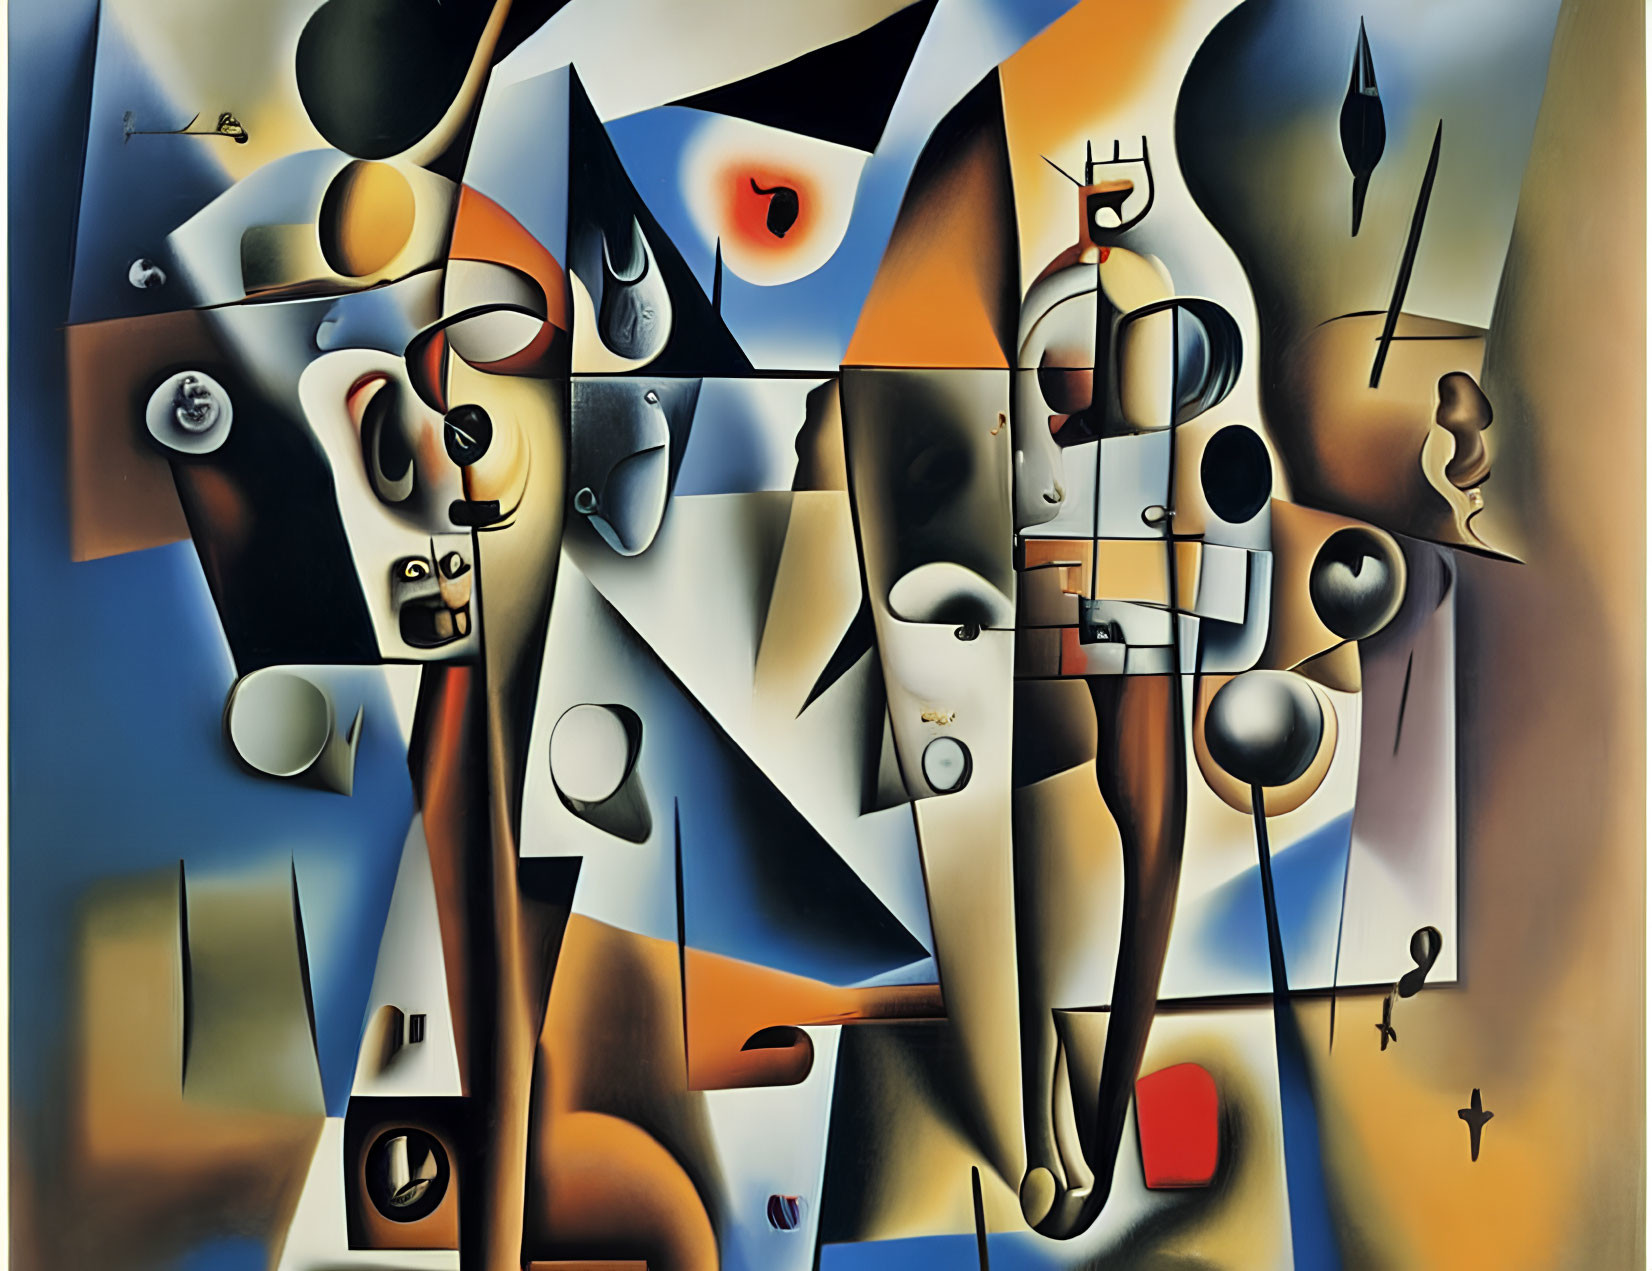 Abstract Surrealist Painting with Geometric Shapes and Distorted Figures